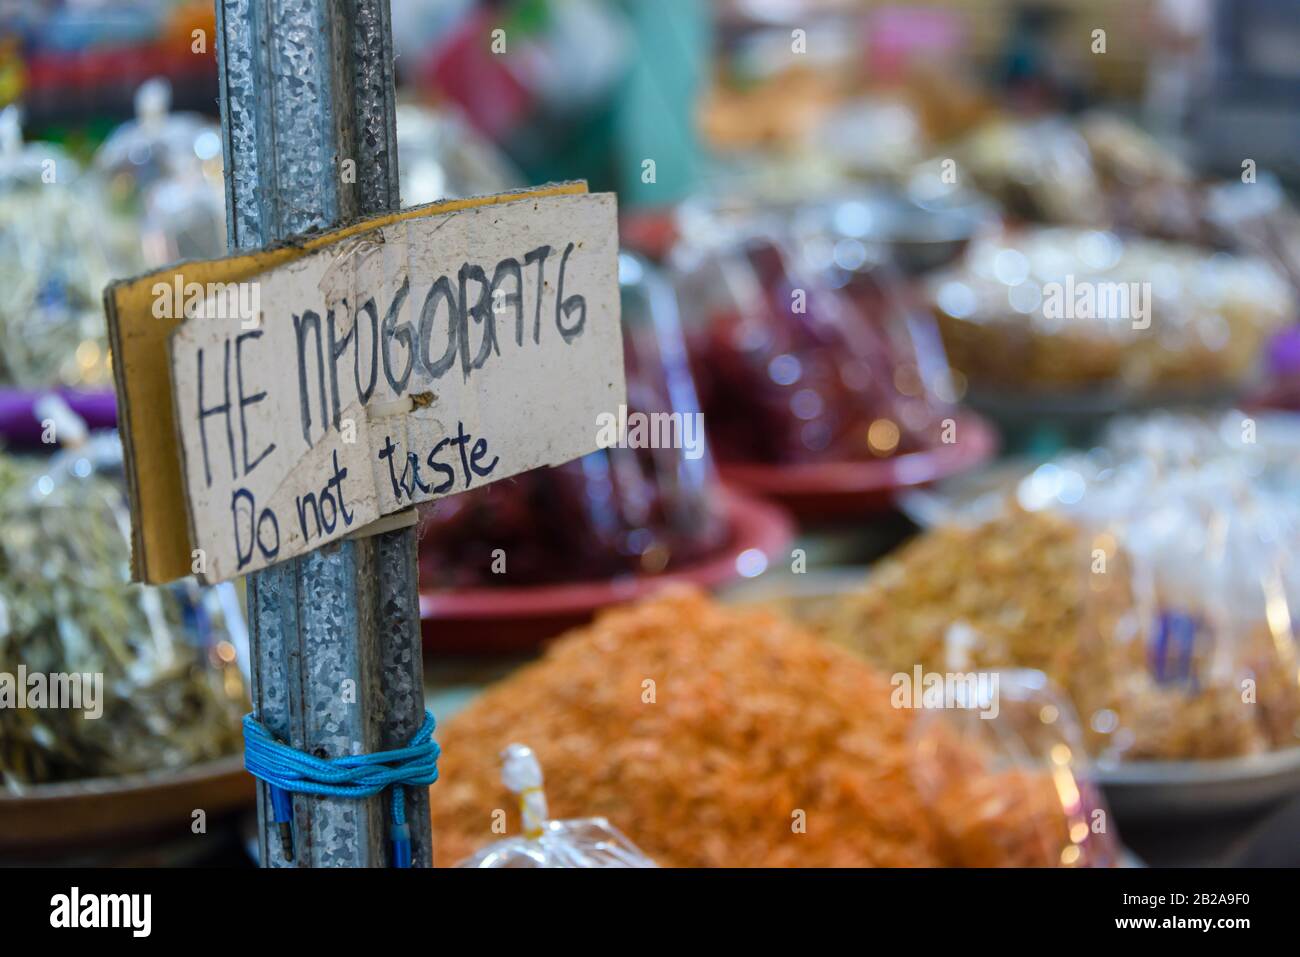 Sign saying 'Do not taste' in Thai and English at a food market stall in Thailand Stock Photo